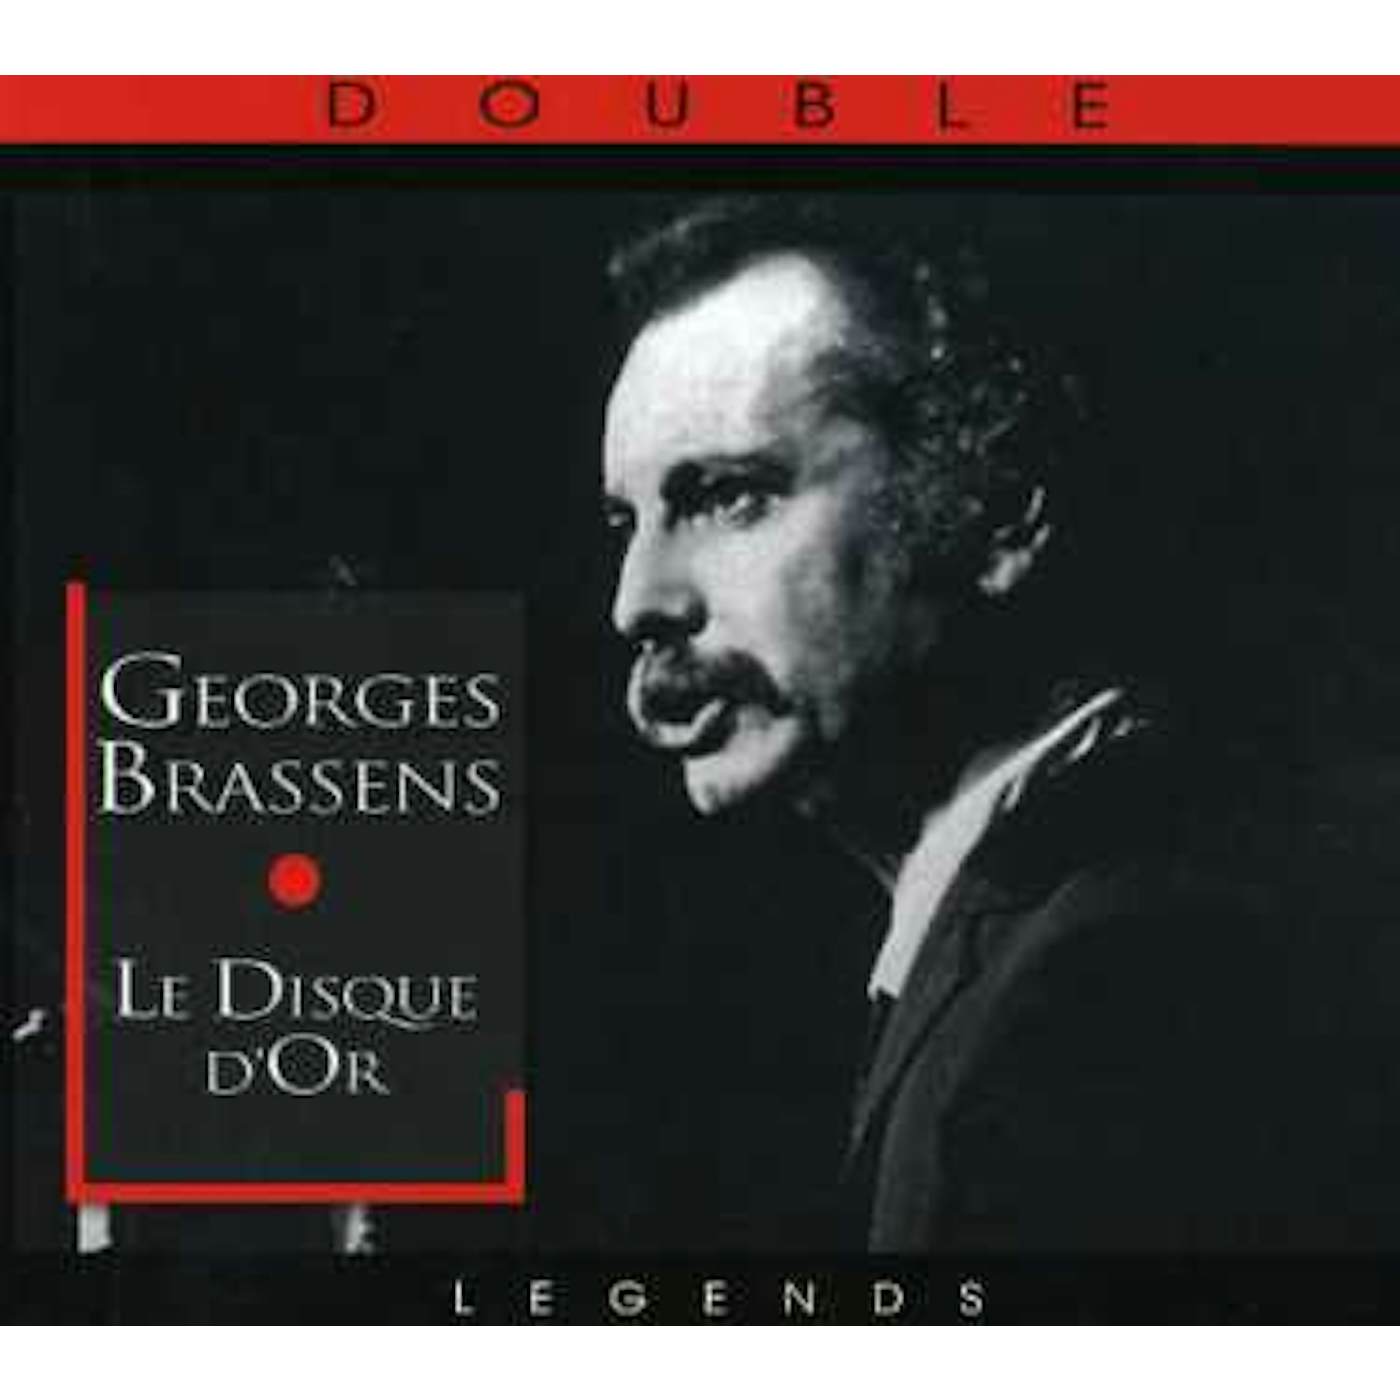 George Brassens DISQUE D'OR CD